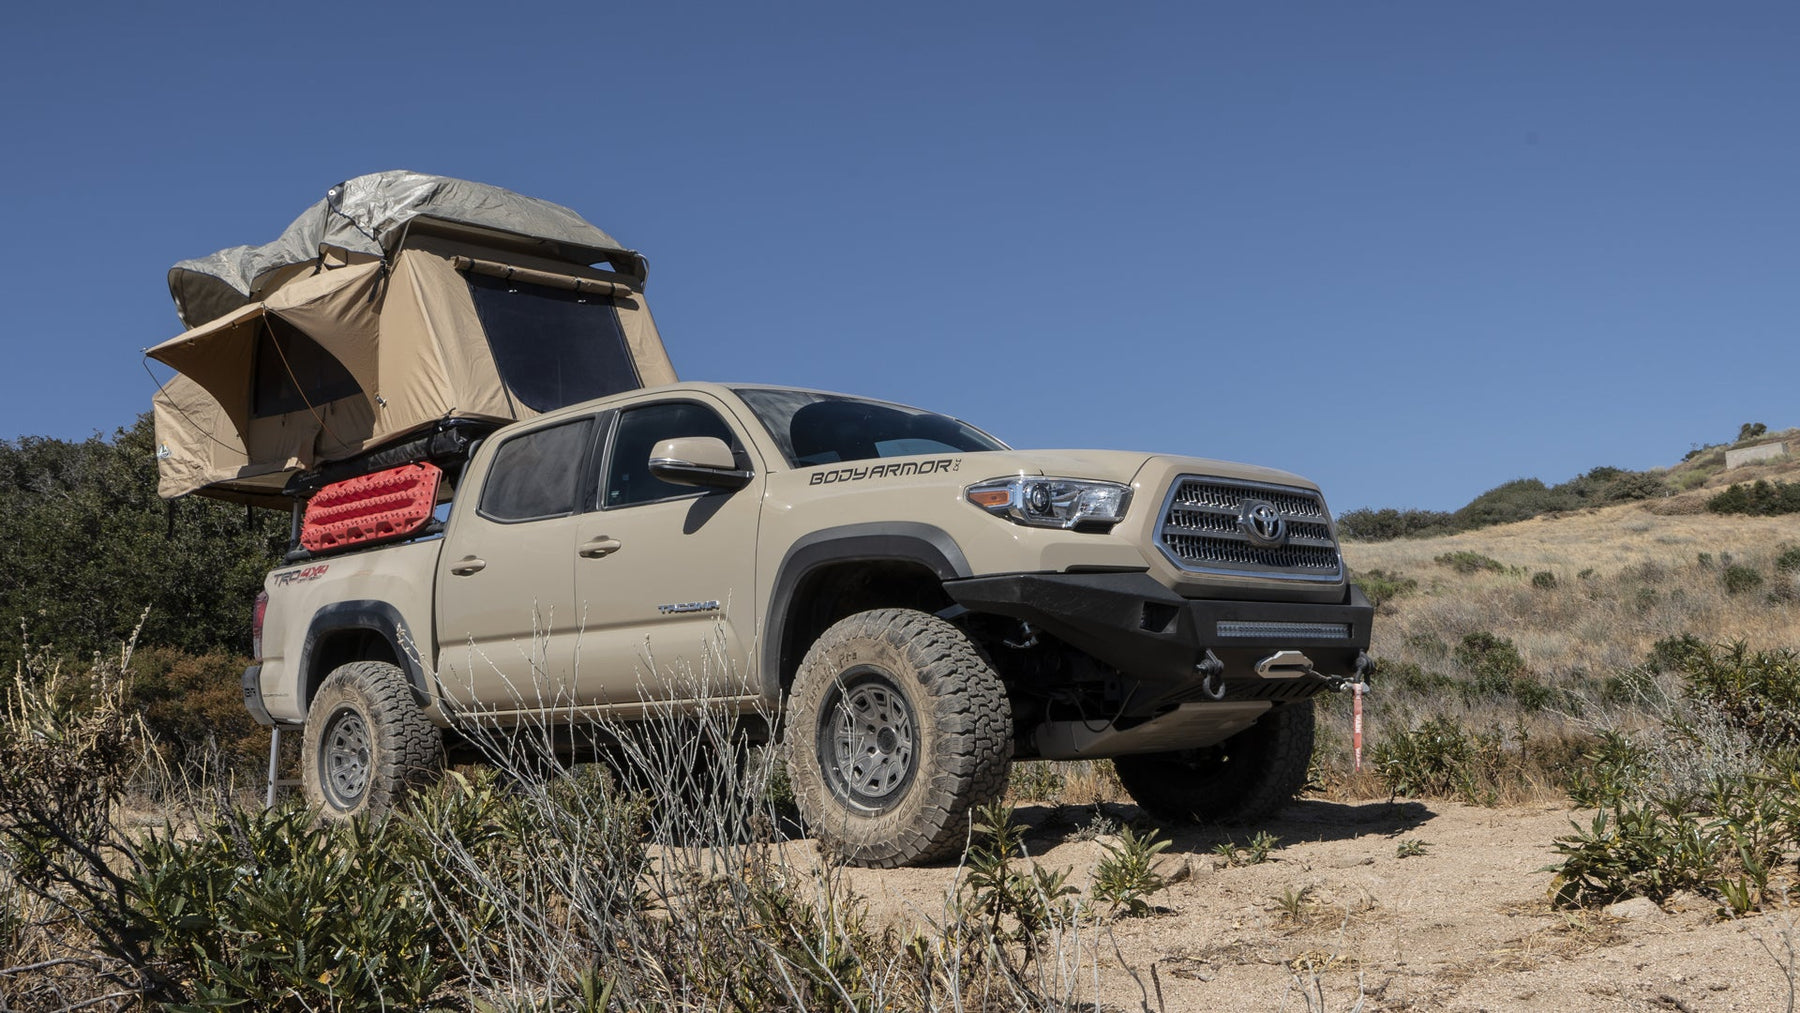 Body Armor TC-6125 Truck Bed Rack Toyota Tacoma 2016-2021-Rooftop Tents USA